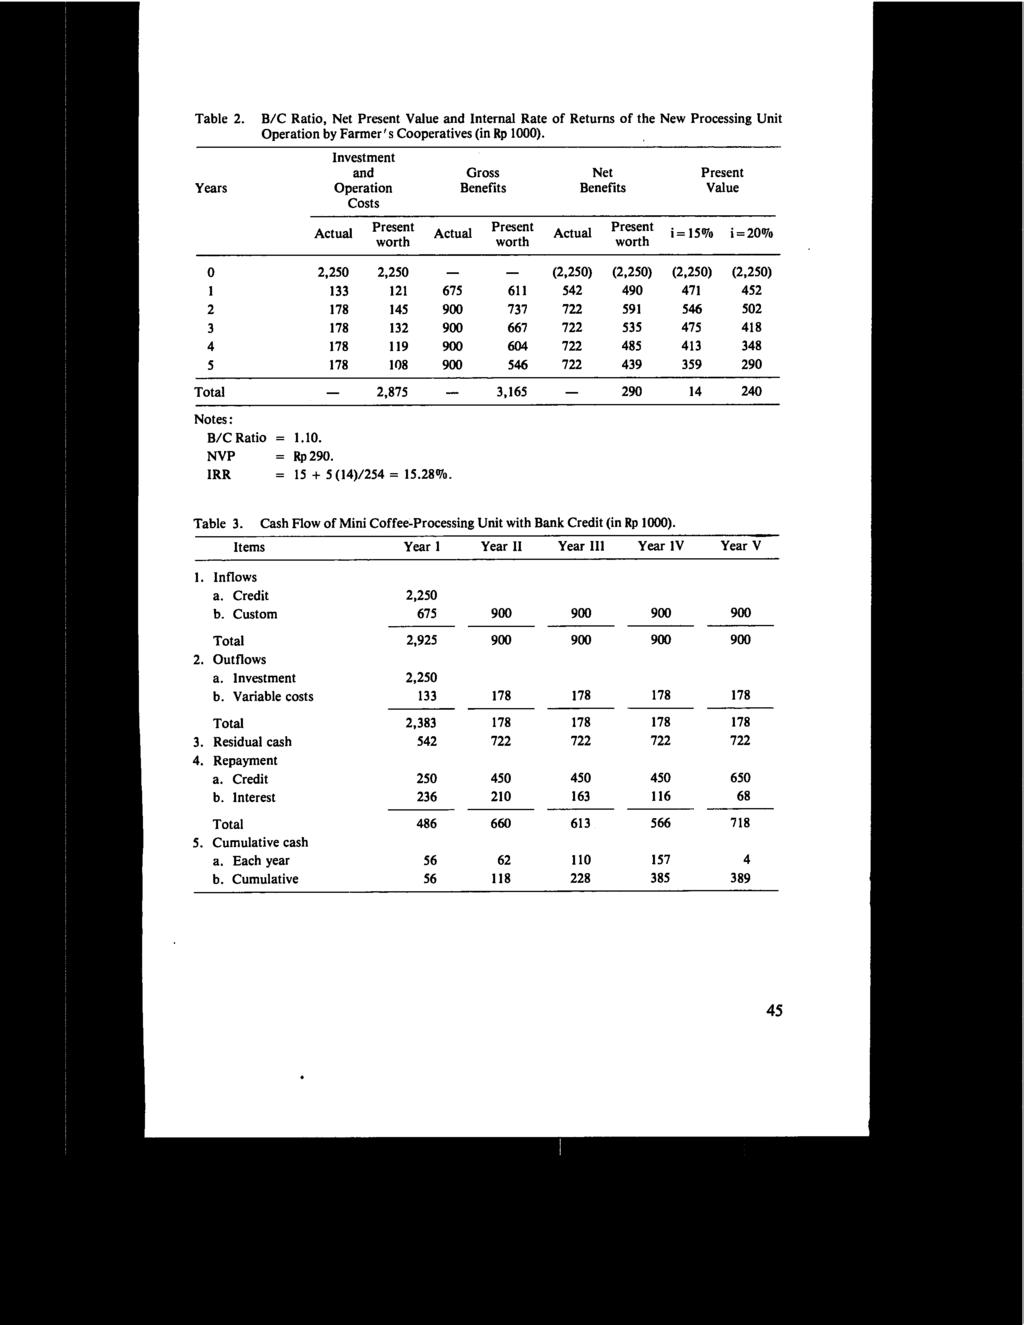 Table 2. B/C Ratio, Net Present Value and Internal Rate of Returns of the New Processing Unit Operation by Farmer's Cooperatives (in Rp 1000).